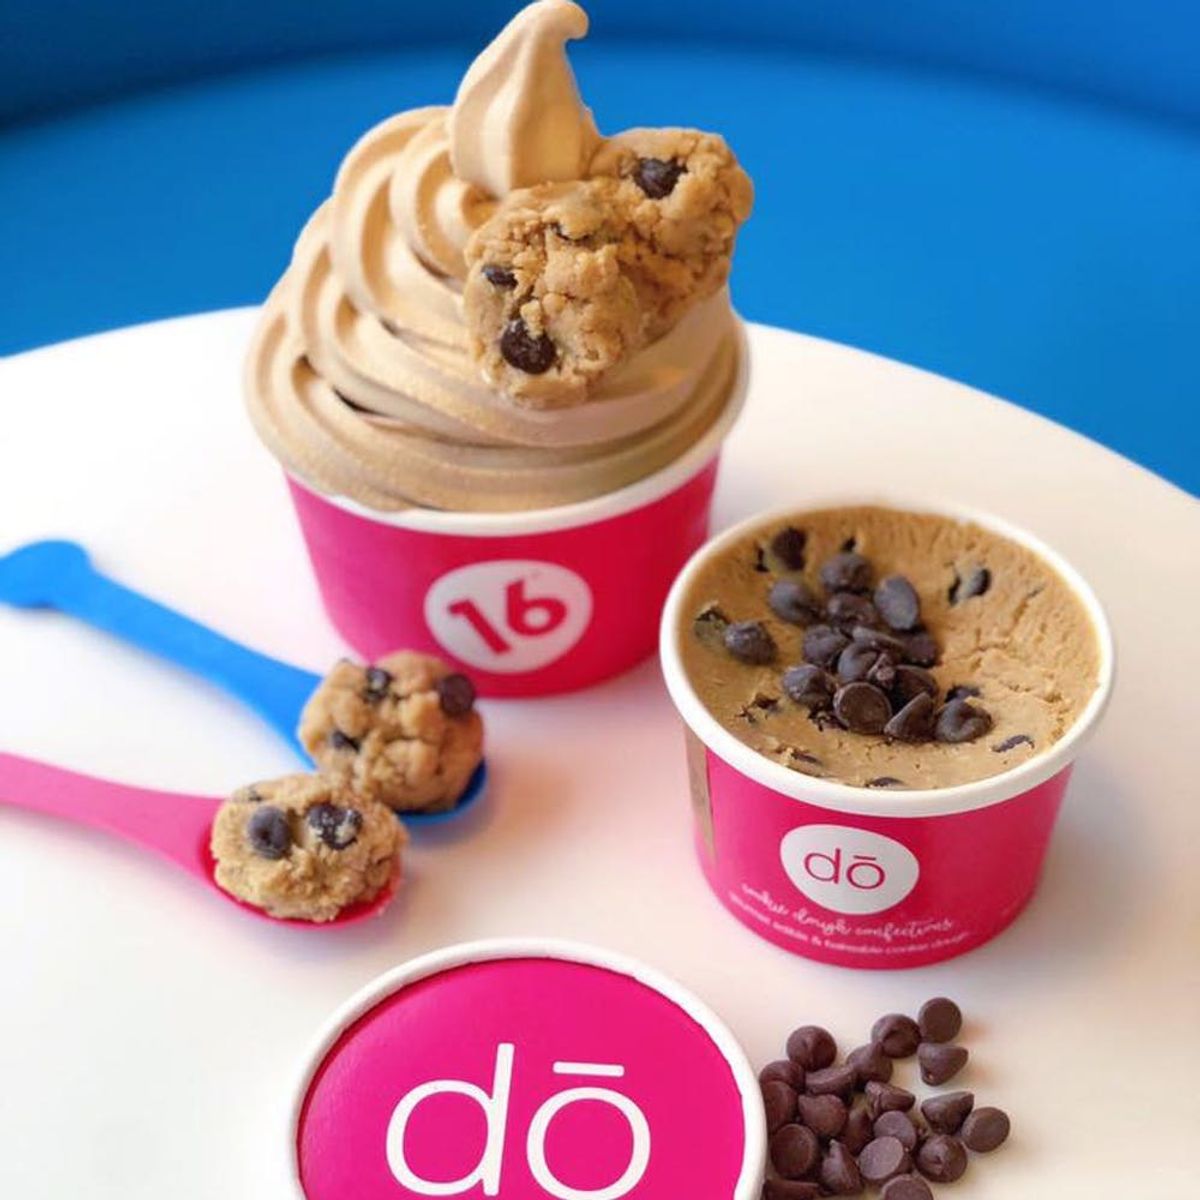 You Can Now Get Cashew-Based Soft Serve and Vegan Cookie Dough at This Chain